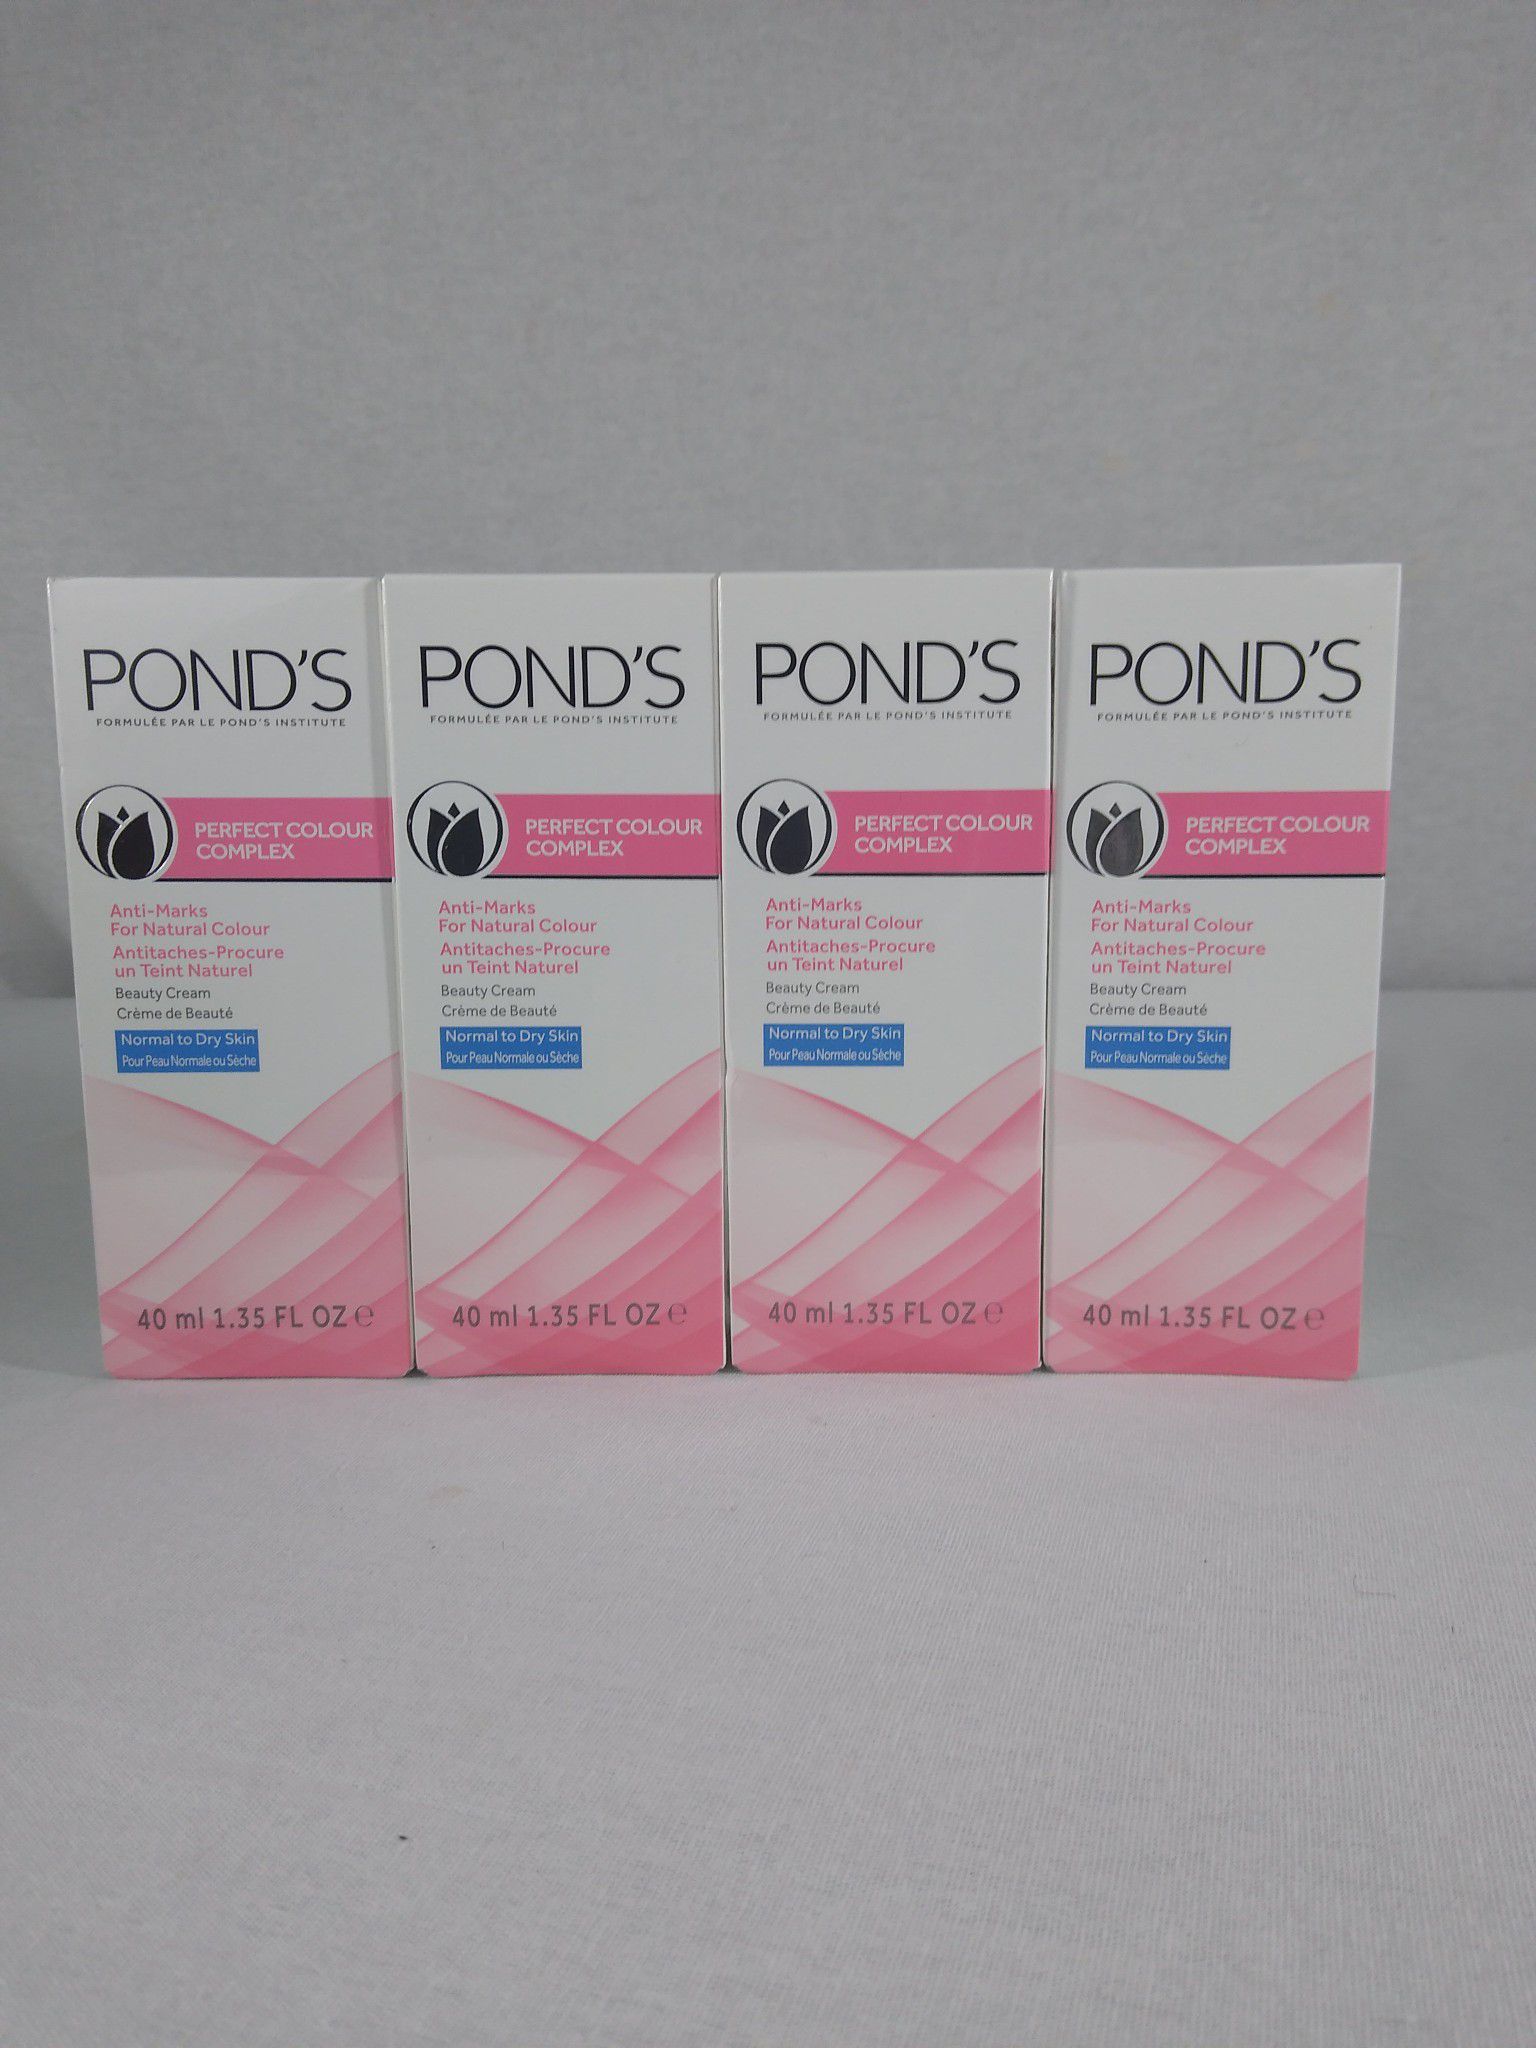 POND'S Perfect Colour Complex Anti-Marks for Natural Colour Beauty Cream (4)